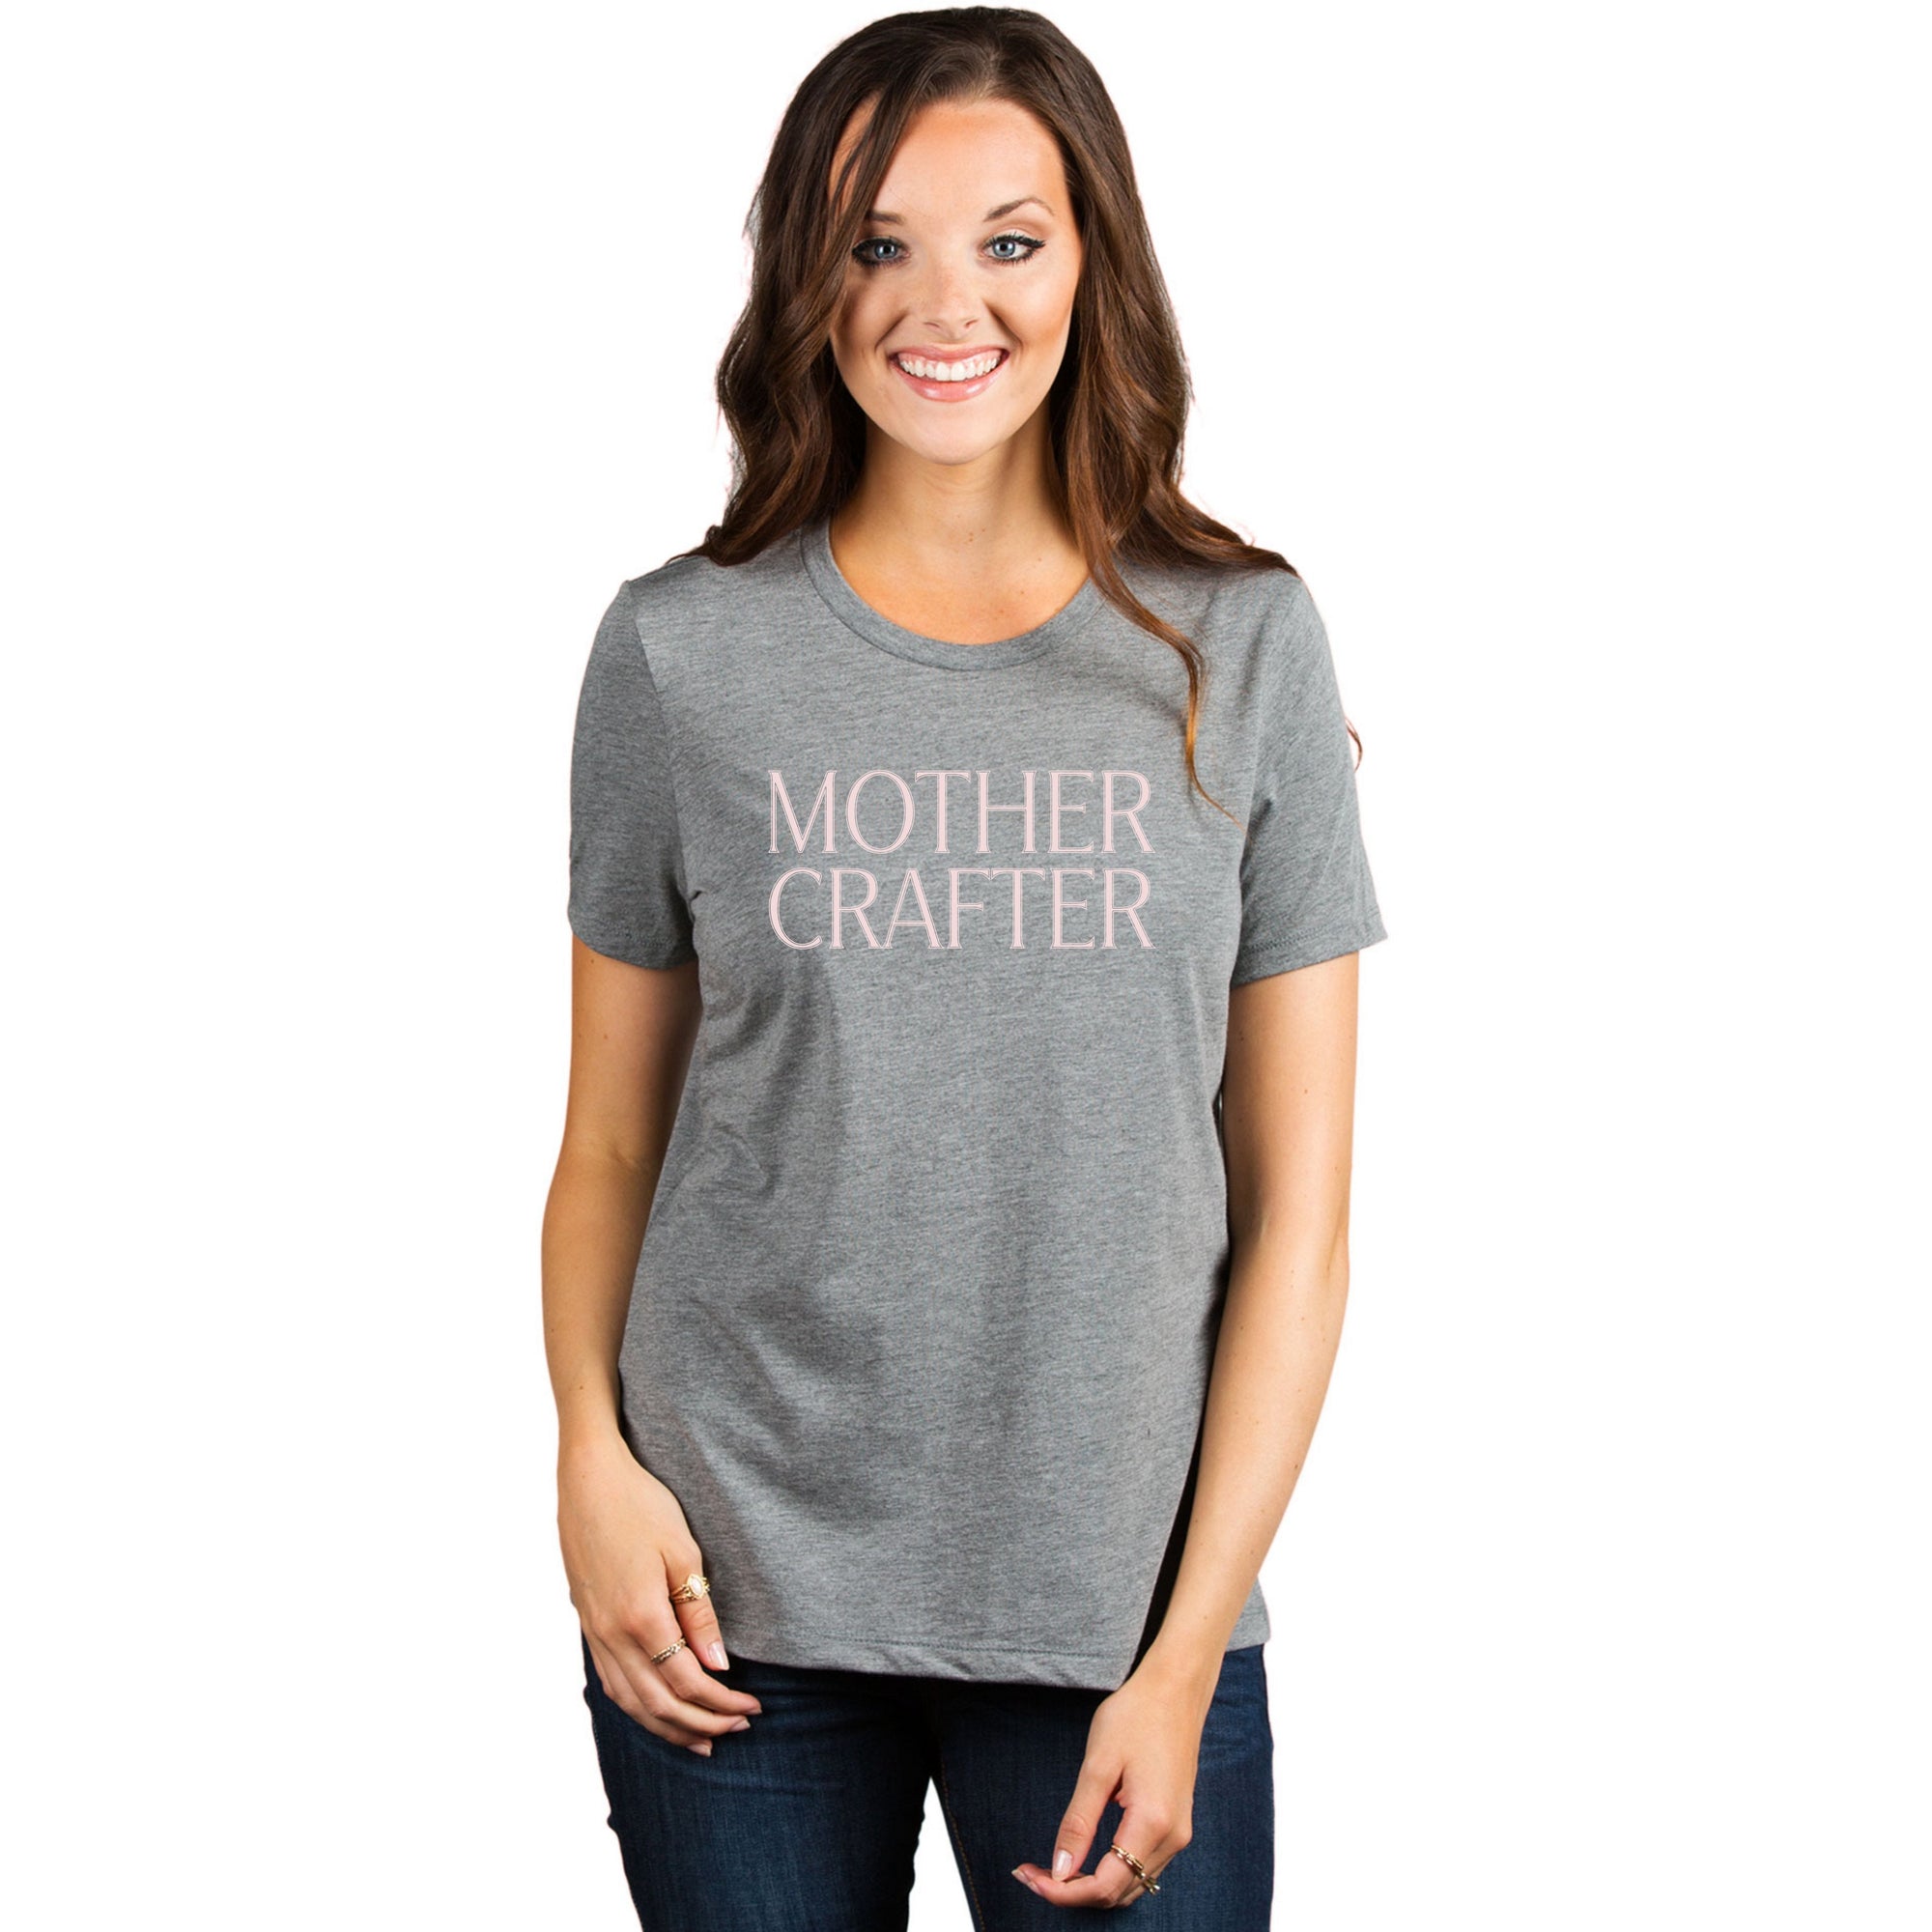 Mother Crafter